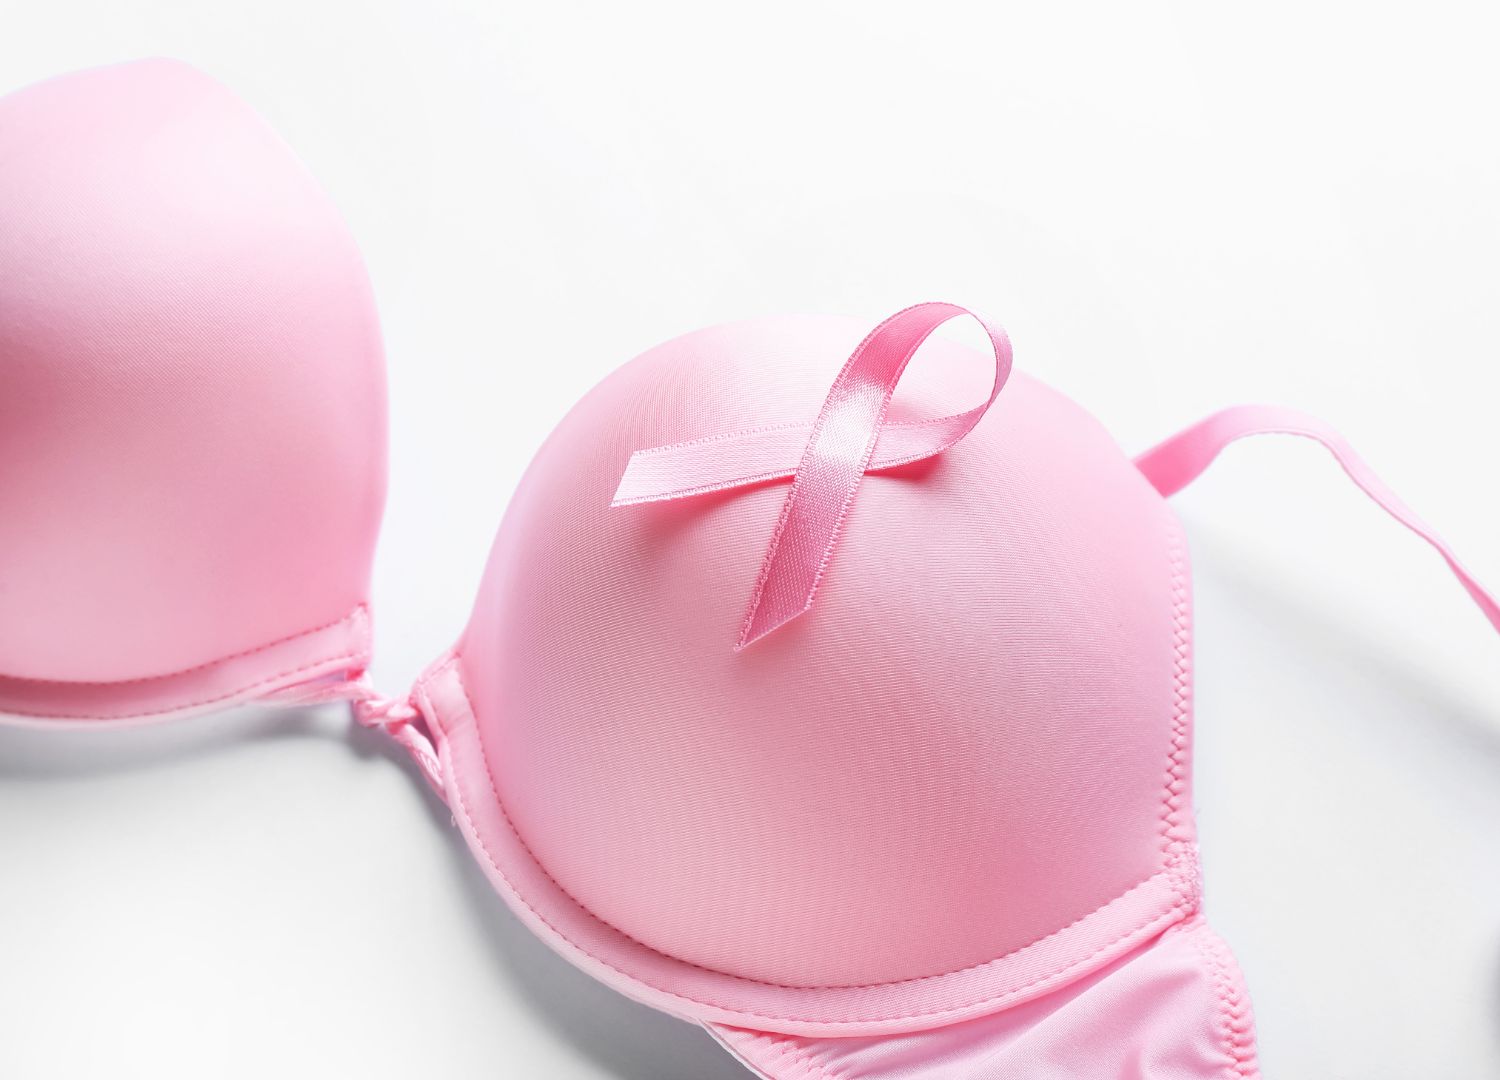 Myths and facts about breast cancer